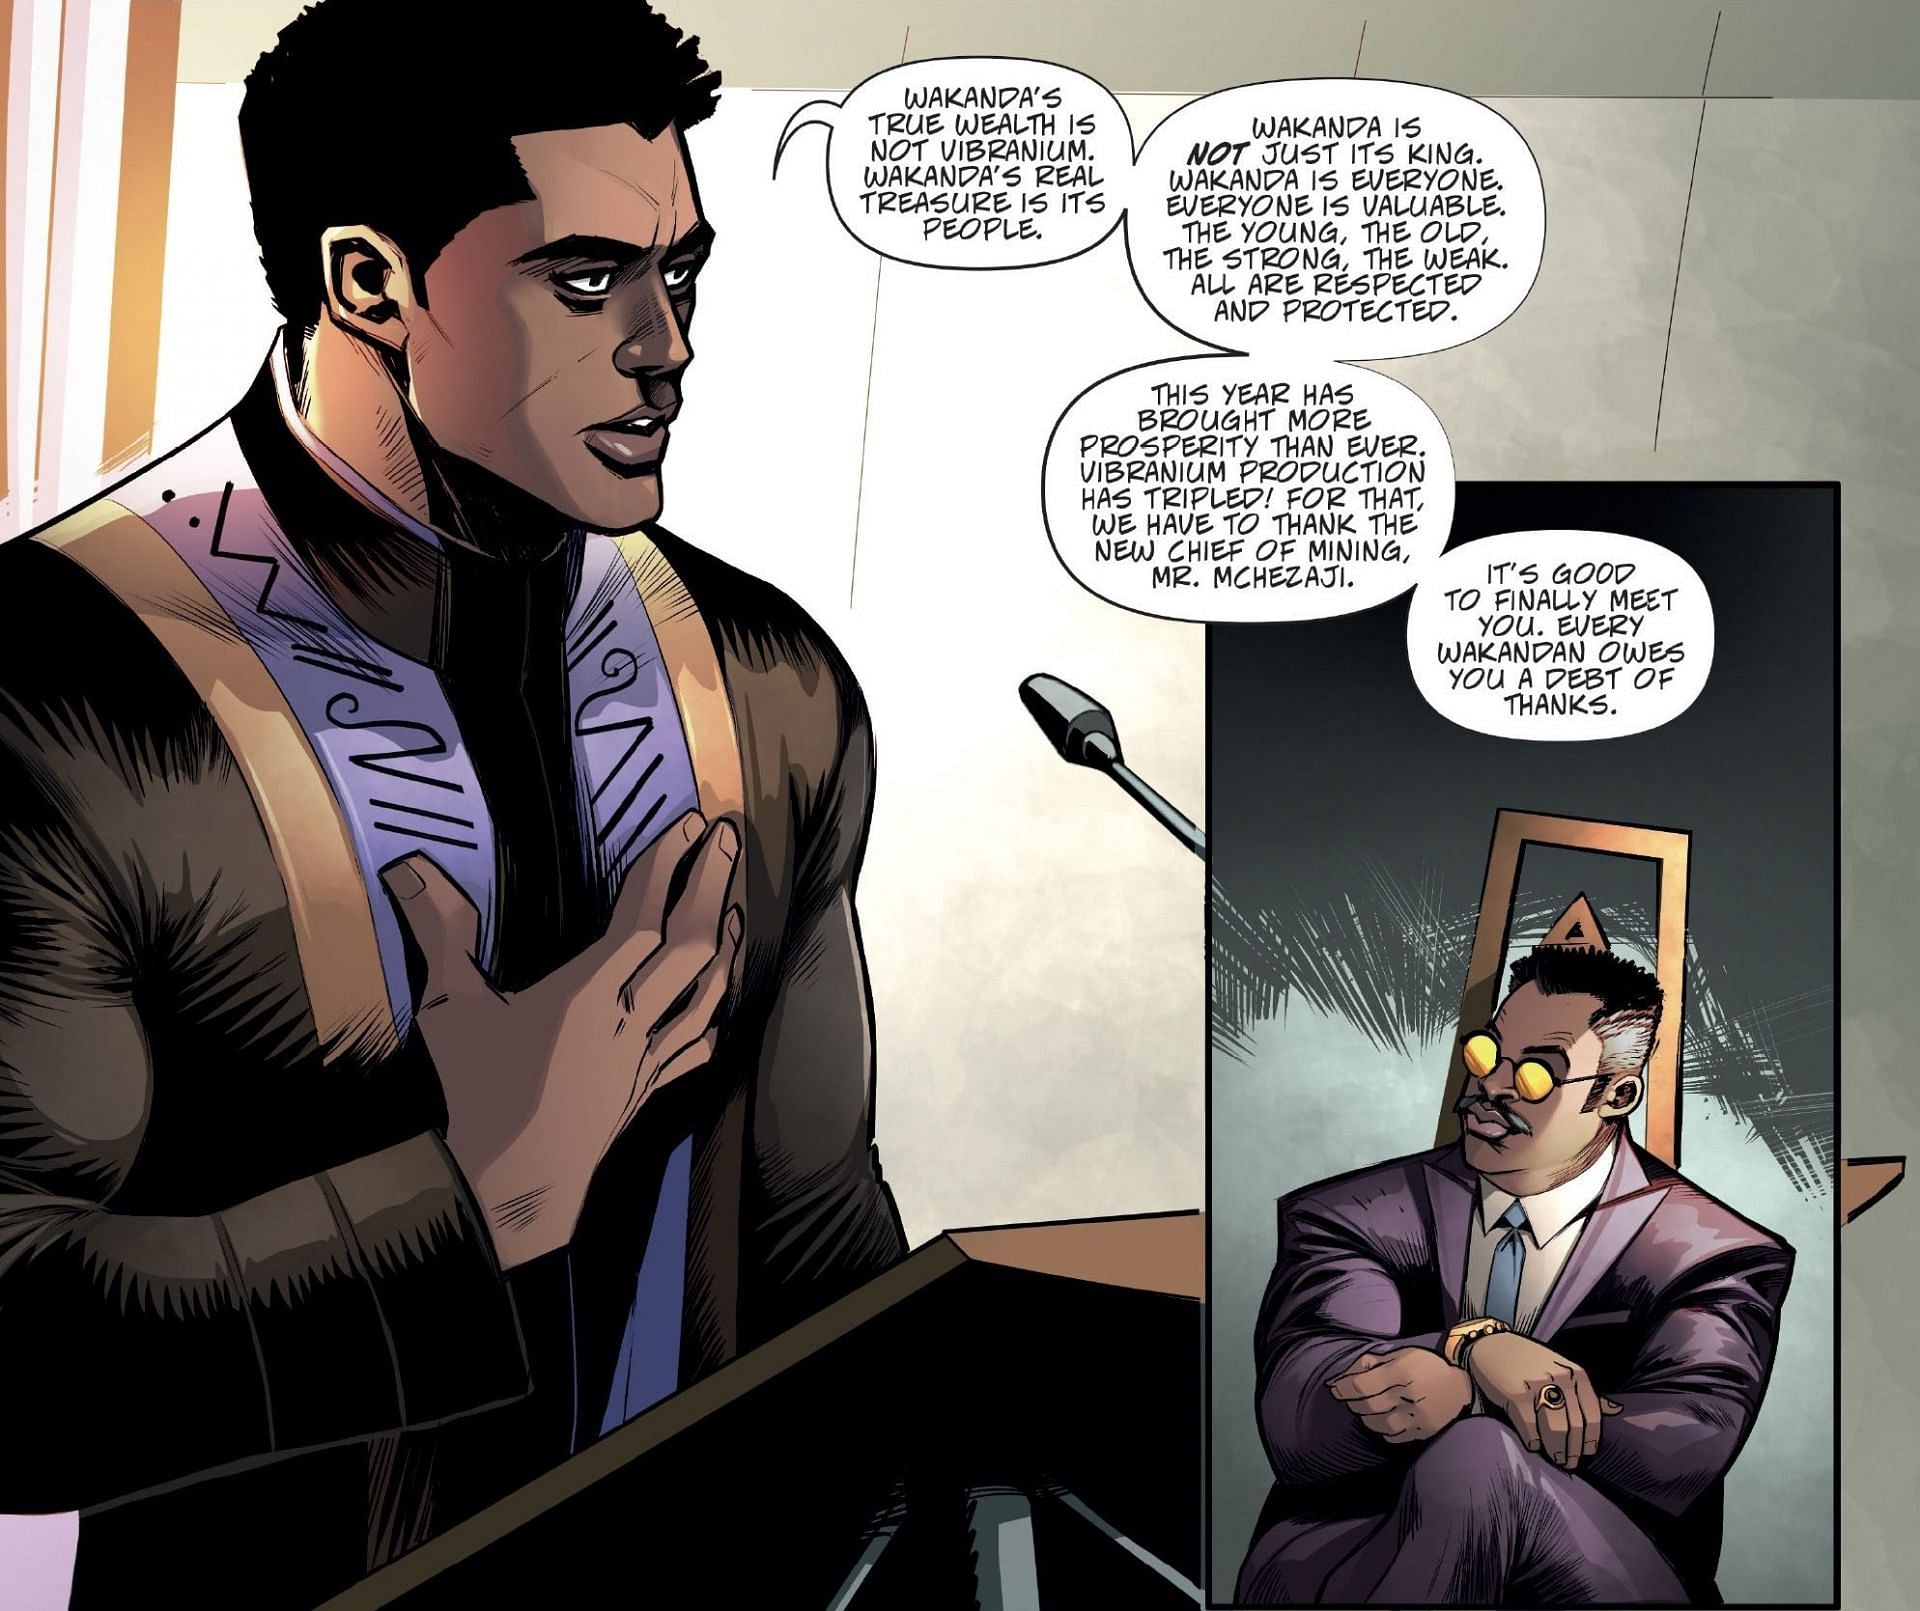 Black Panther: 6 Marvel Comics That Could Inspire the New Game